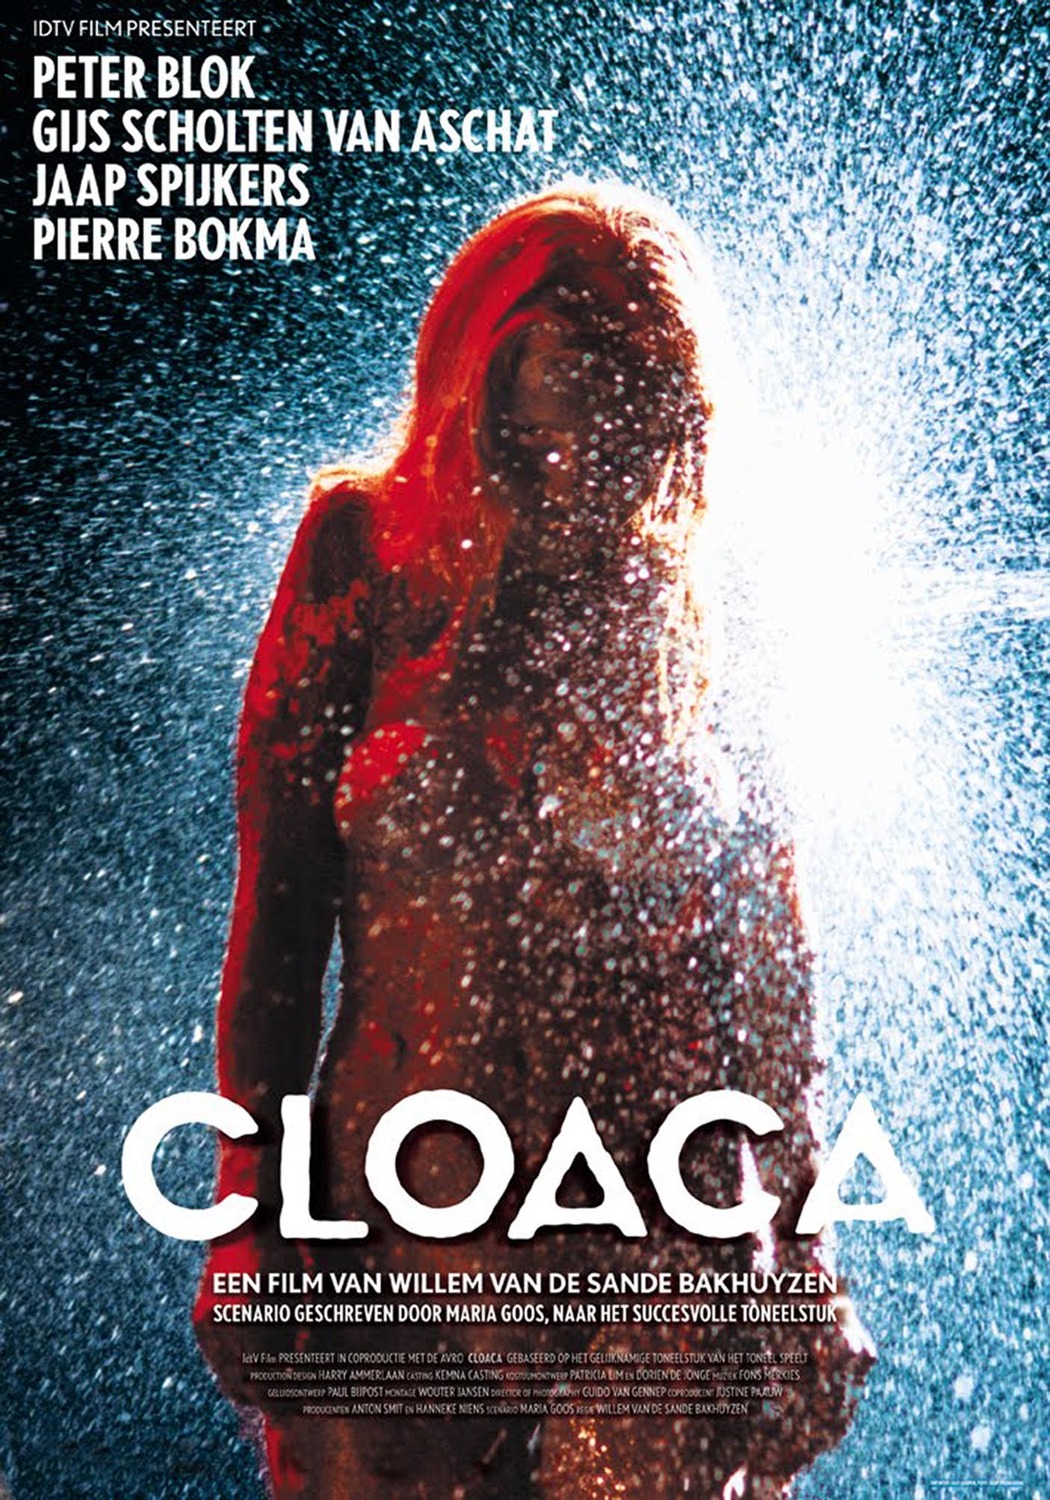 Extra Large Movie Poster Image for Cloaca 